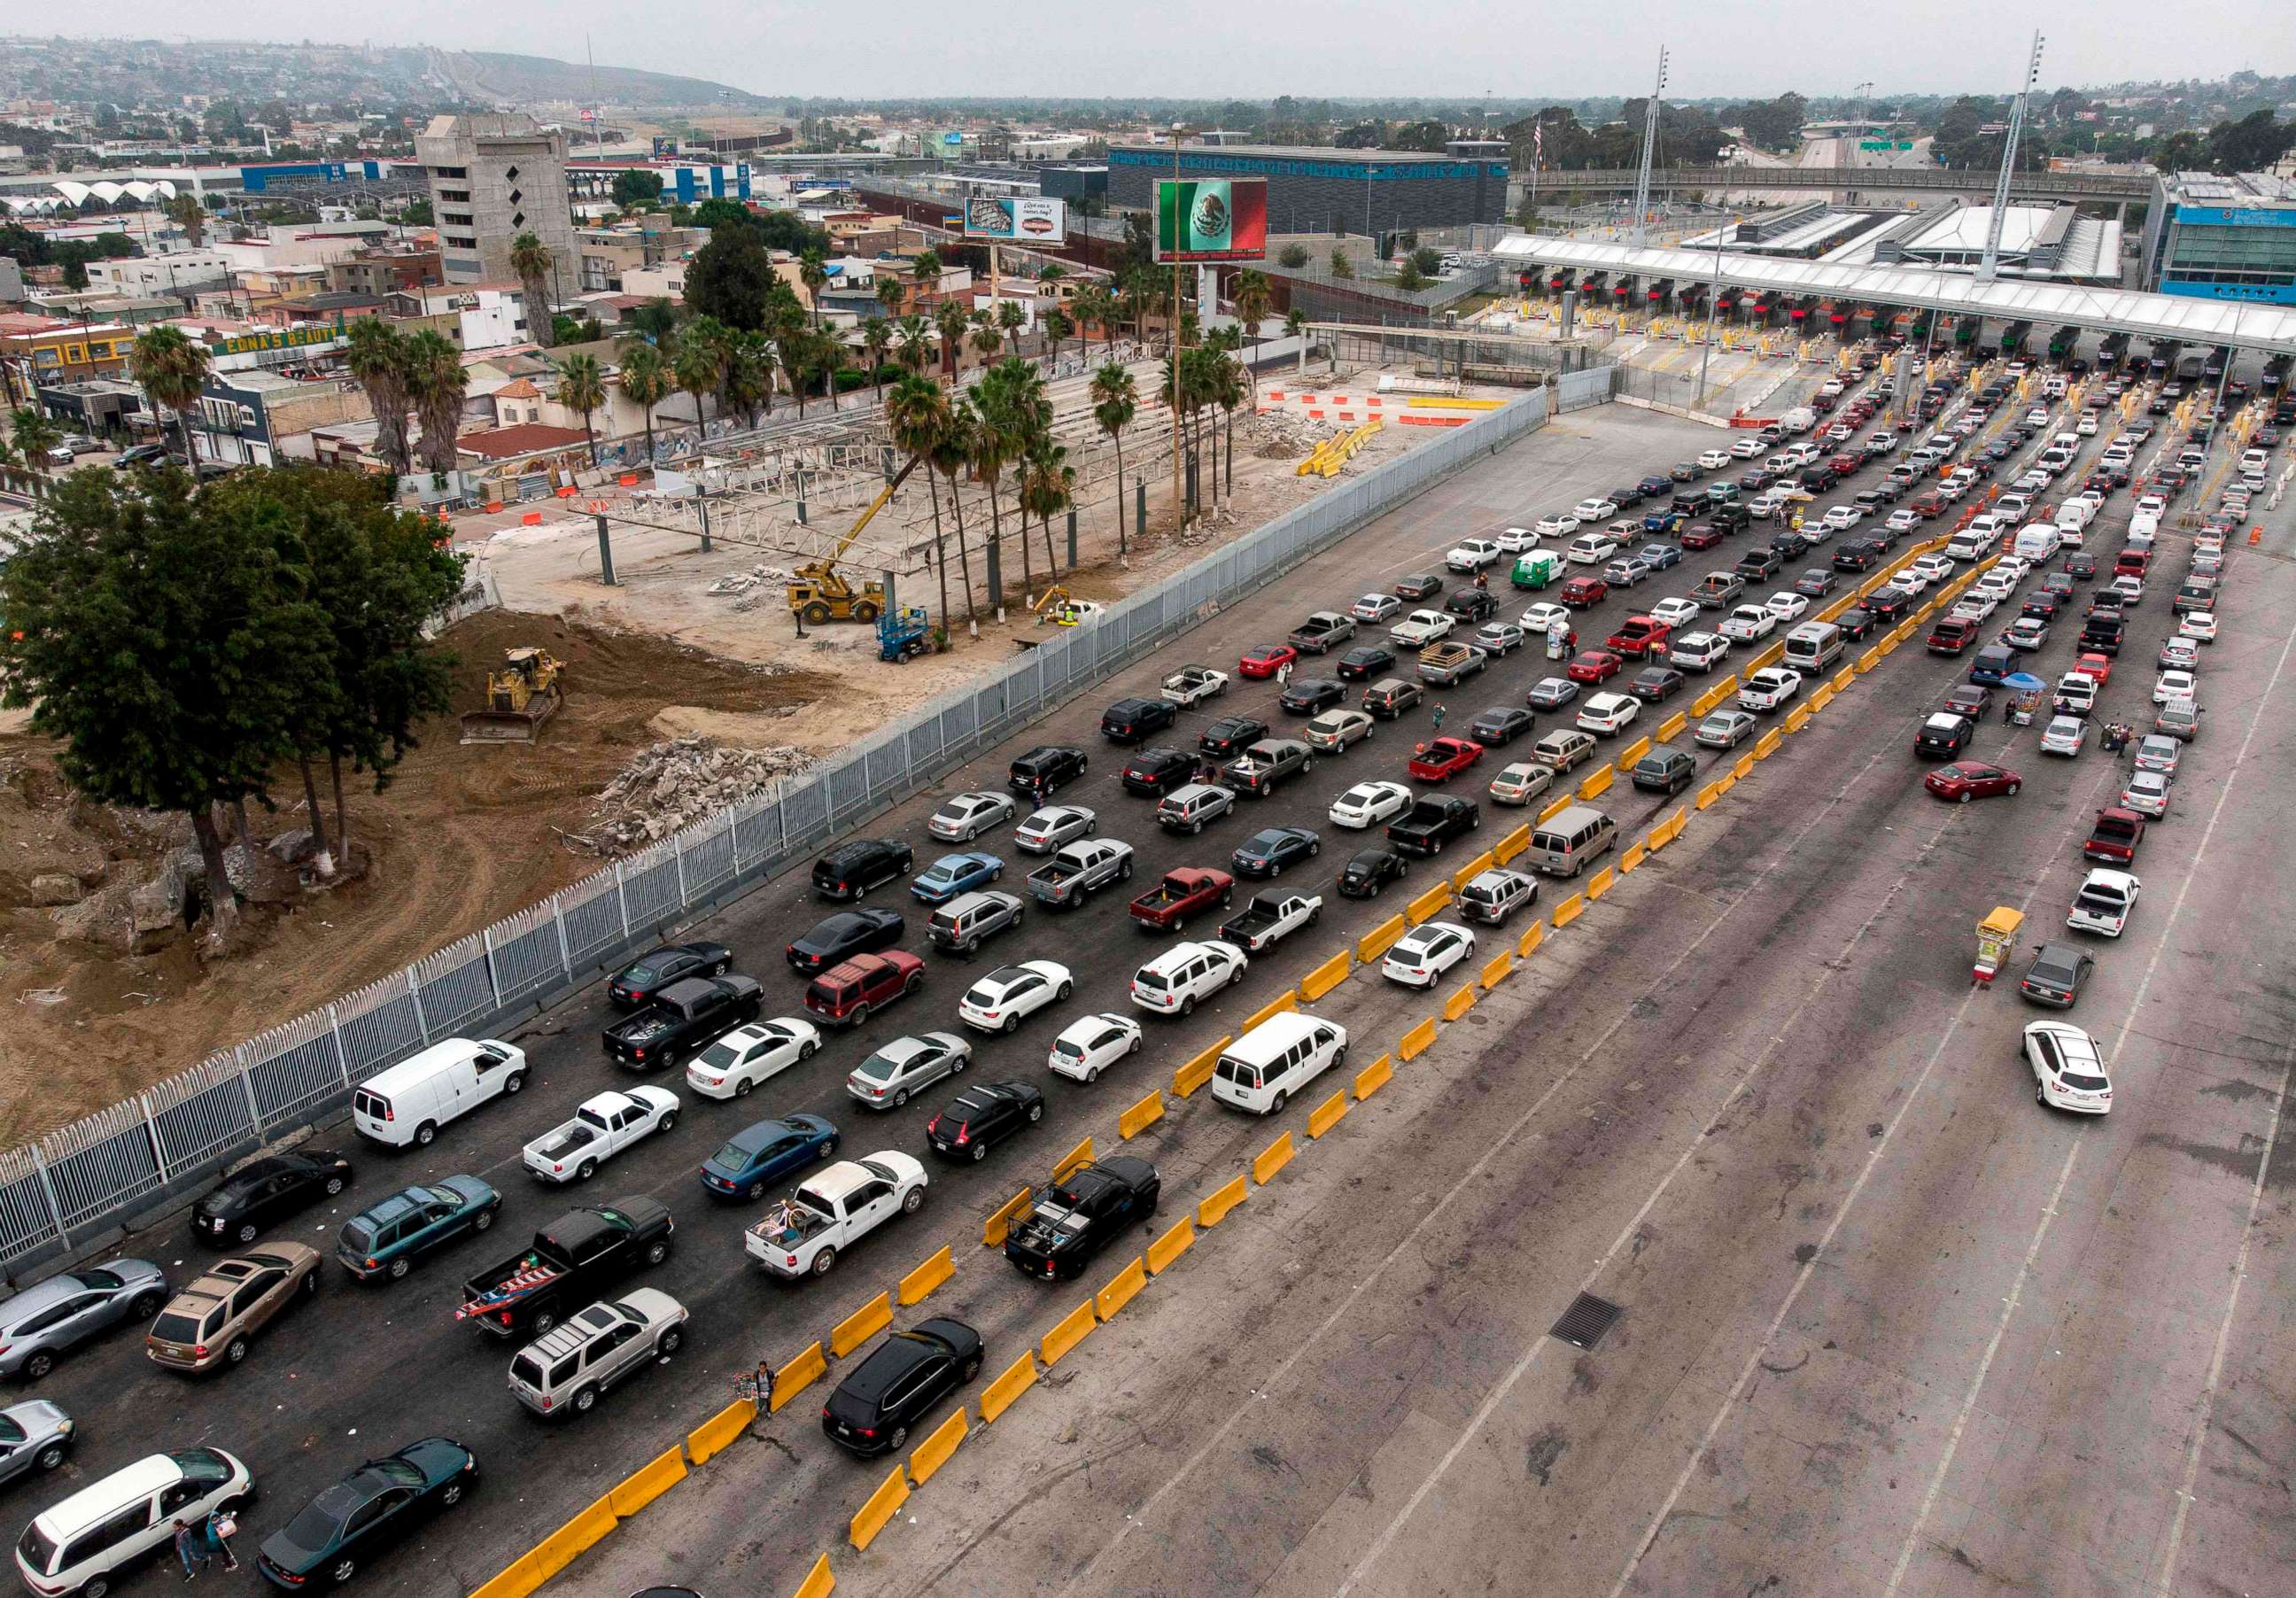 PHOTO: Aerial view of Mexico's old customs facilities (above), next to the construction site of an expansion of the crossing lanes at San Ysidro crossing port on the US-Mexico border in Tijuana, Baja California state, on July 27, 2020.